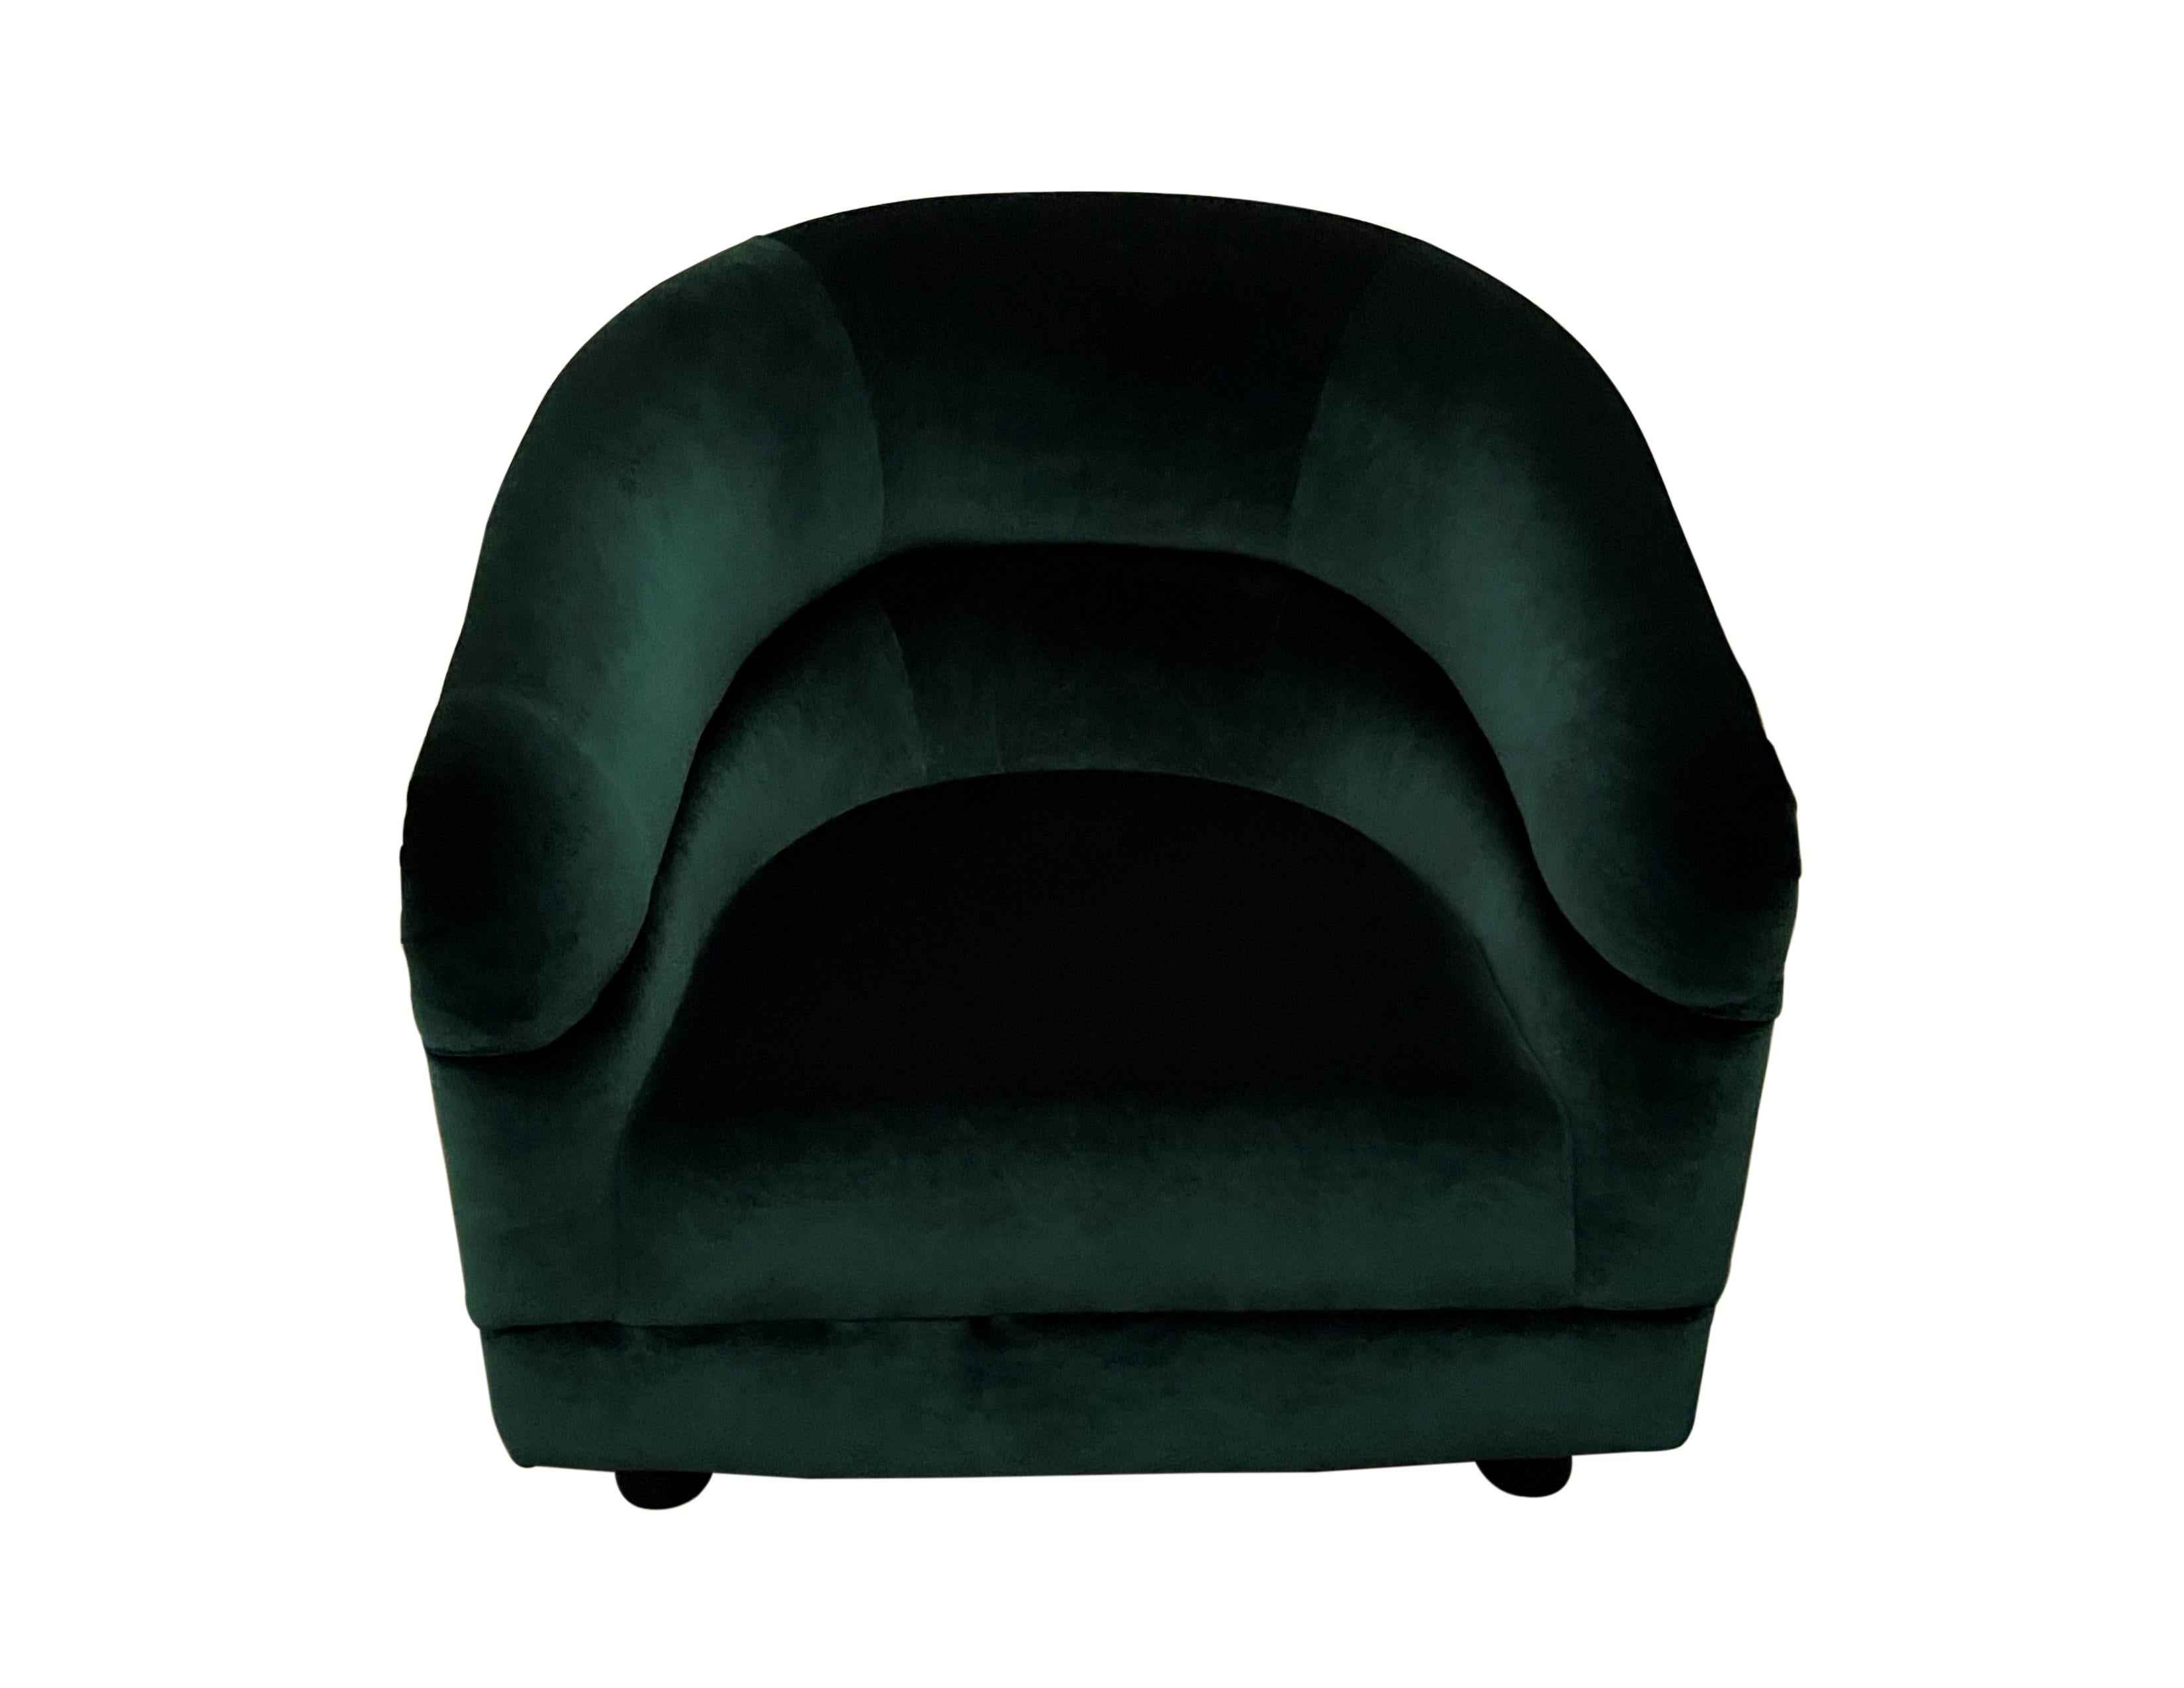 A fabulous pair of Mid-Century Modern barrel back club/lounge chairs, dating from the 1970's. Reupholstered in a luxurious and rich emerald green jewel tone velvet. Very comfortable, stylish and elegant vintage midcentury chairs that work well with